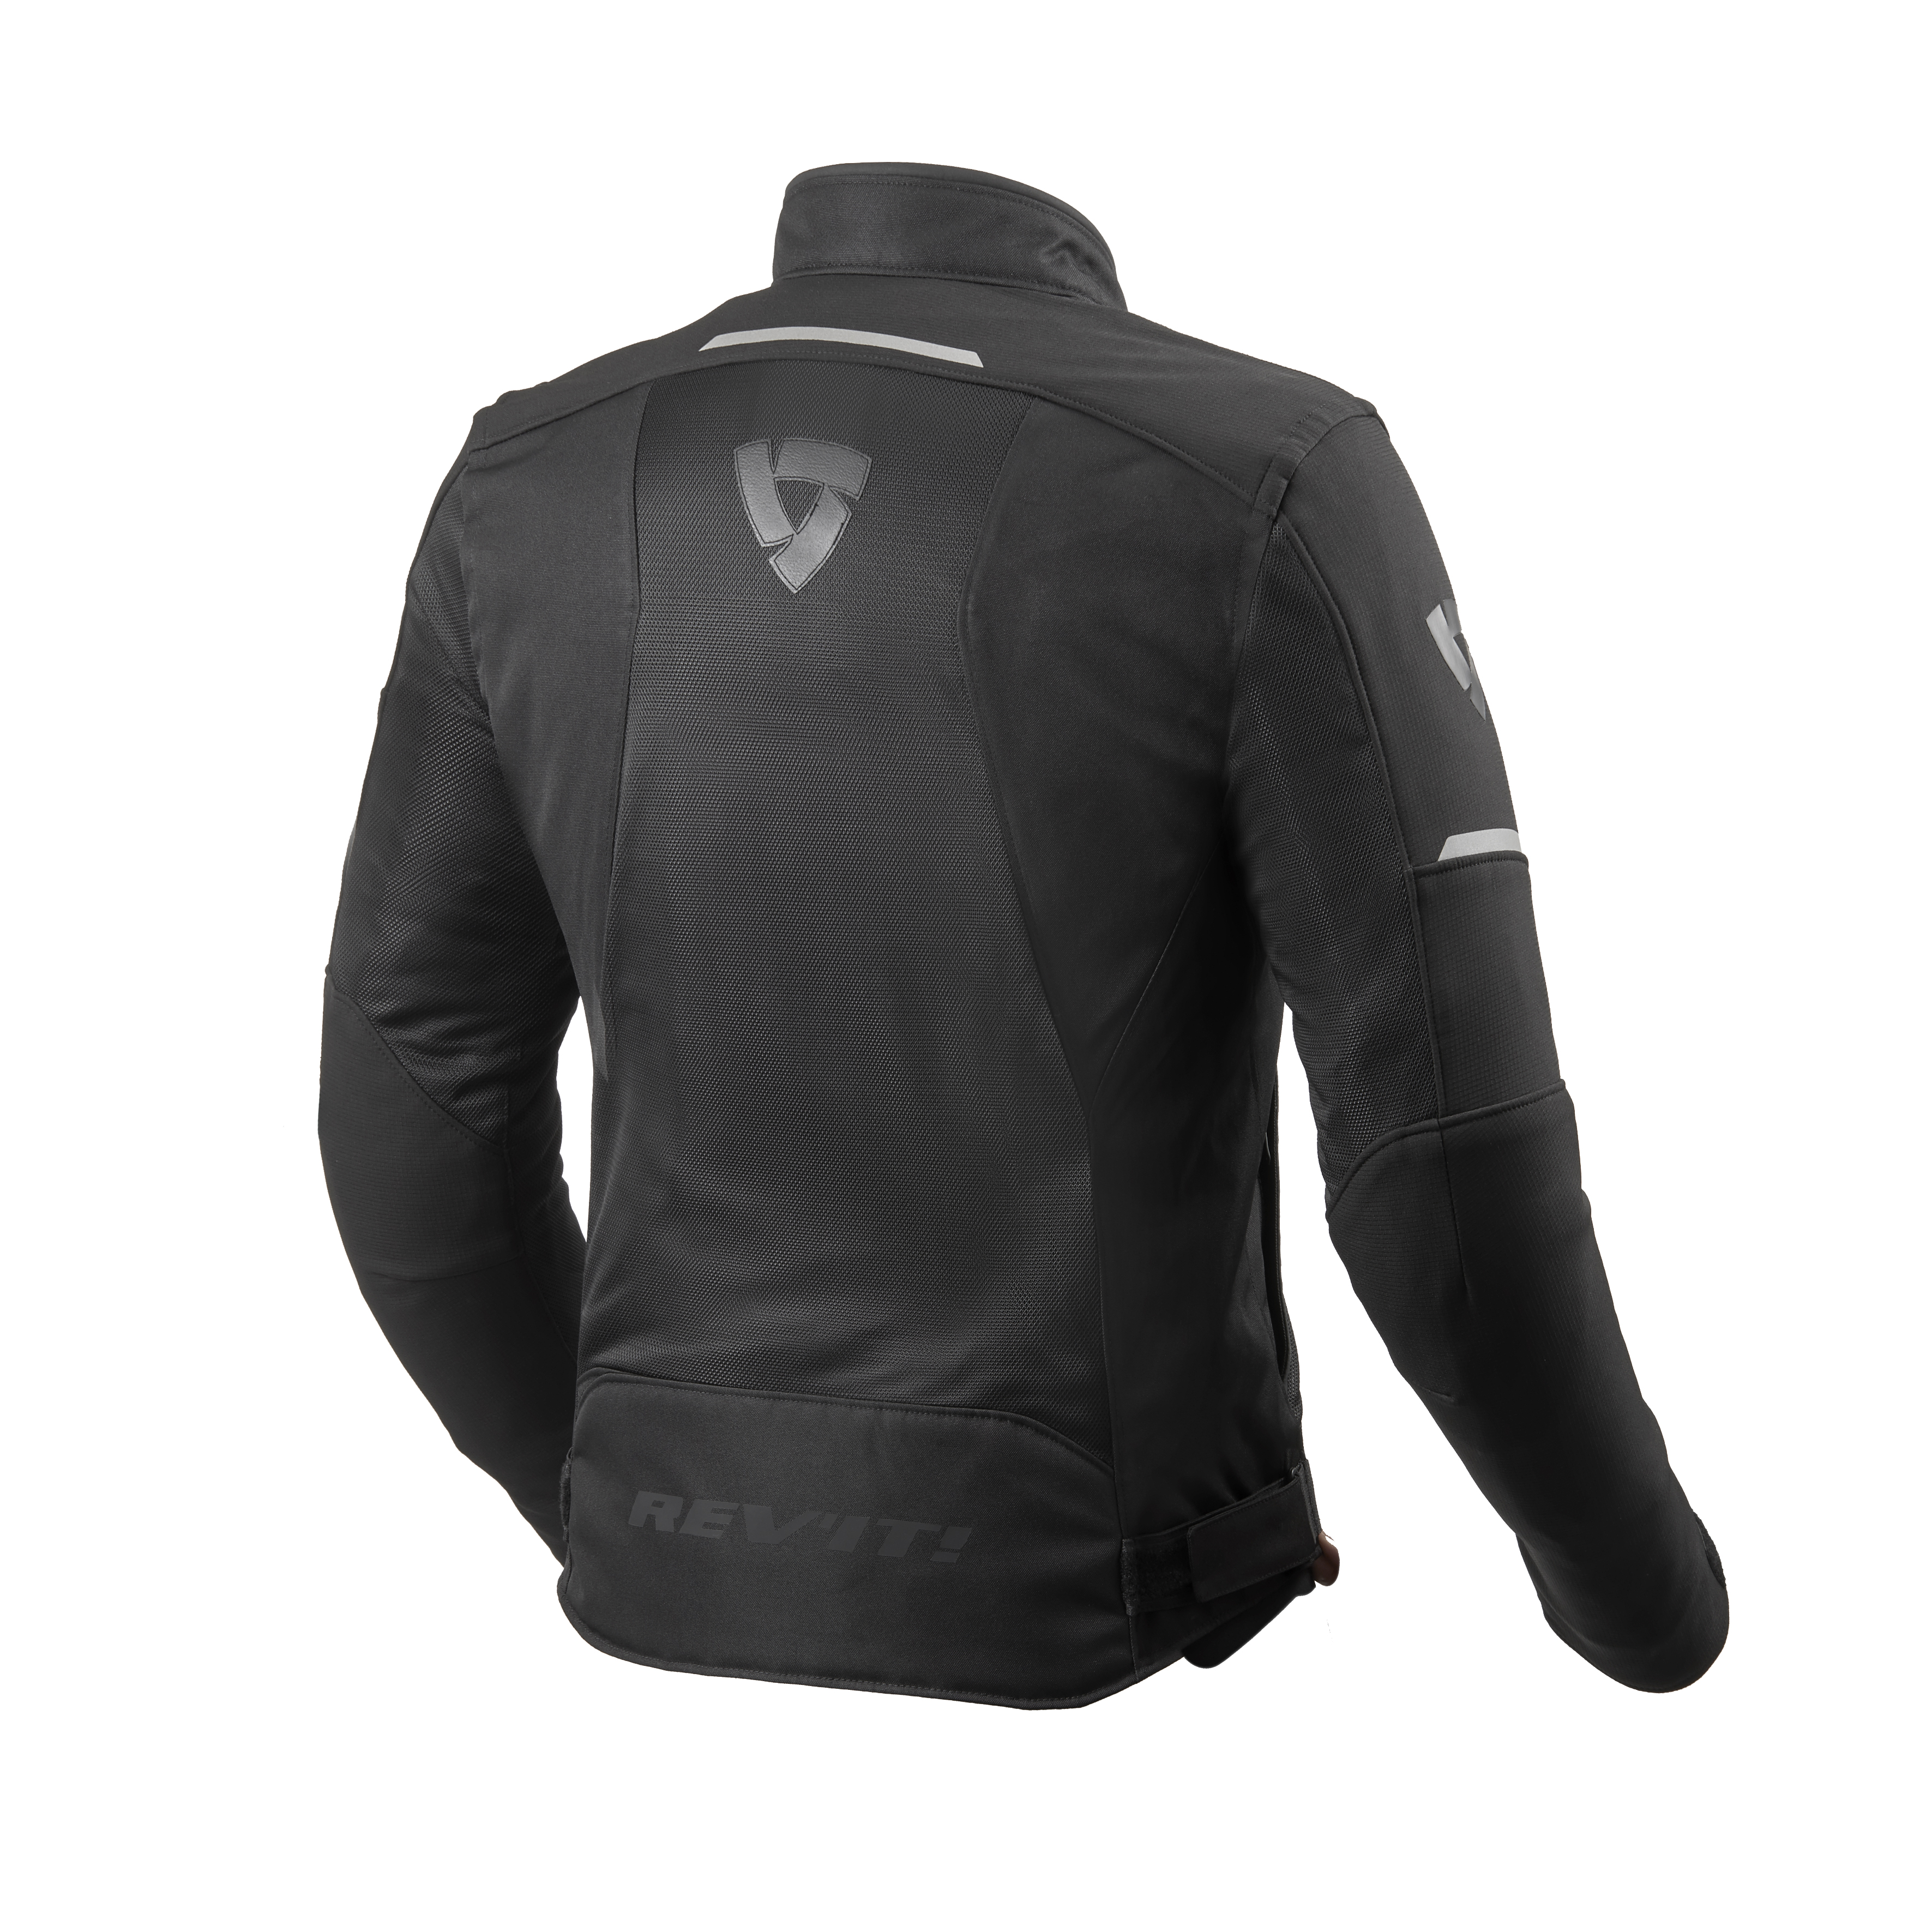 Viewing Images For REV'IT! Airwave 3 Jacket :: MotorcycleGear.com